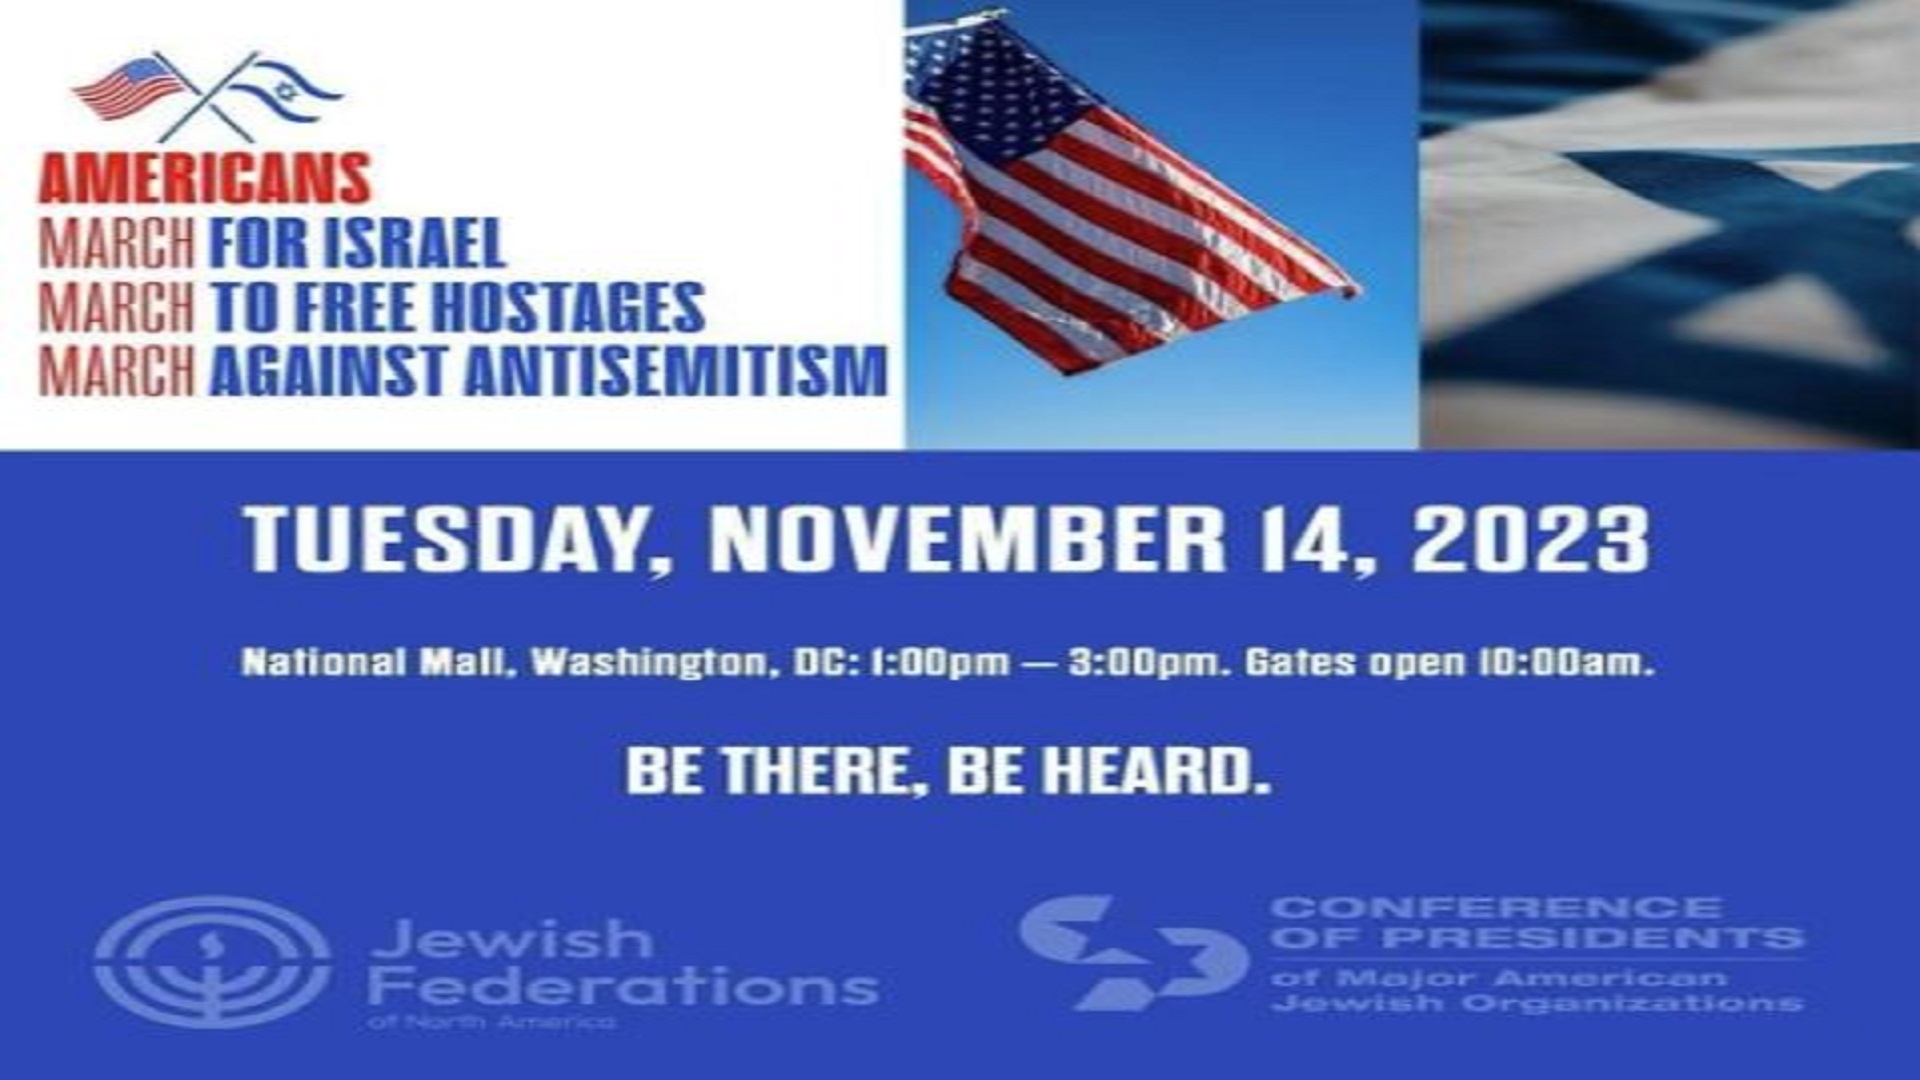 Americans March for Israel in D.C. on Nov. 14 Victory News